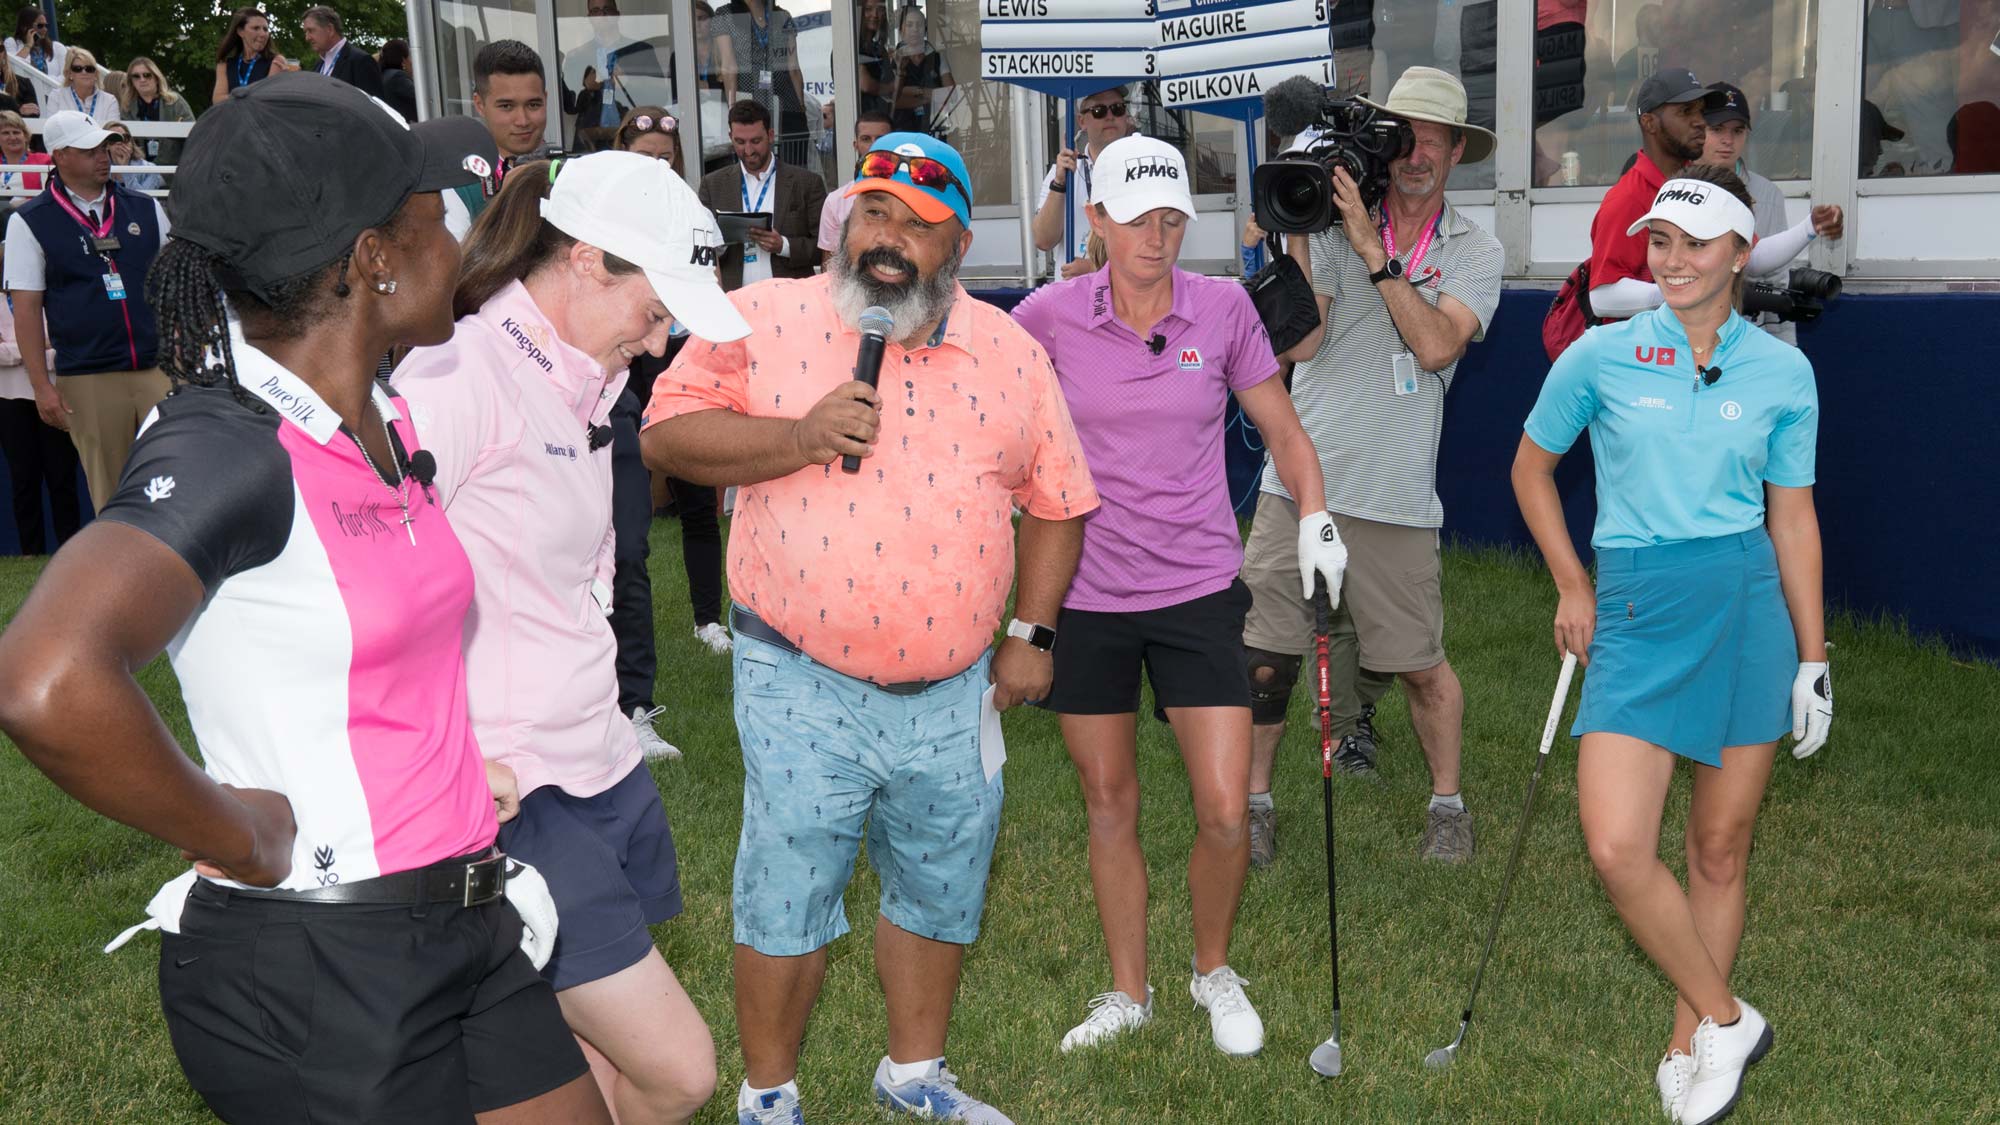 ESPN Golf Analyst, Michael Collins speaks to Leona Maguire, Mariah Stackhouse, Stacy Lewis and Klara Spilkova during the KPMG Player Showcase for the 65th KPMG Women’s PGA Championship 